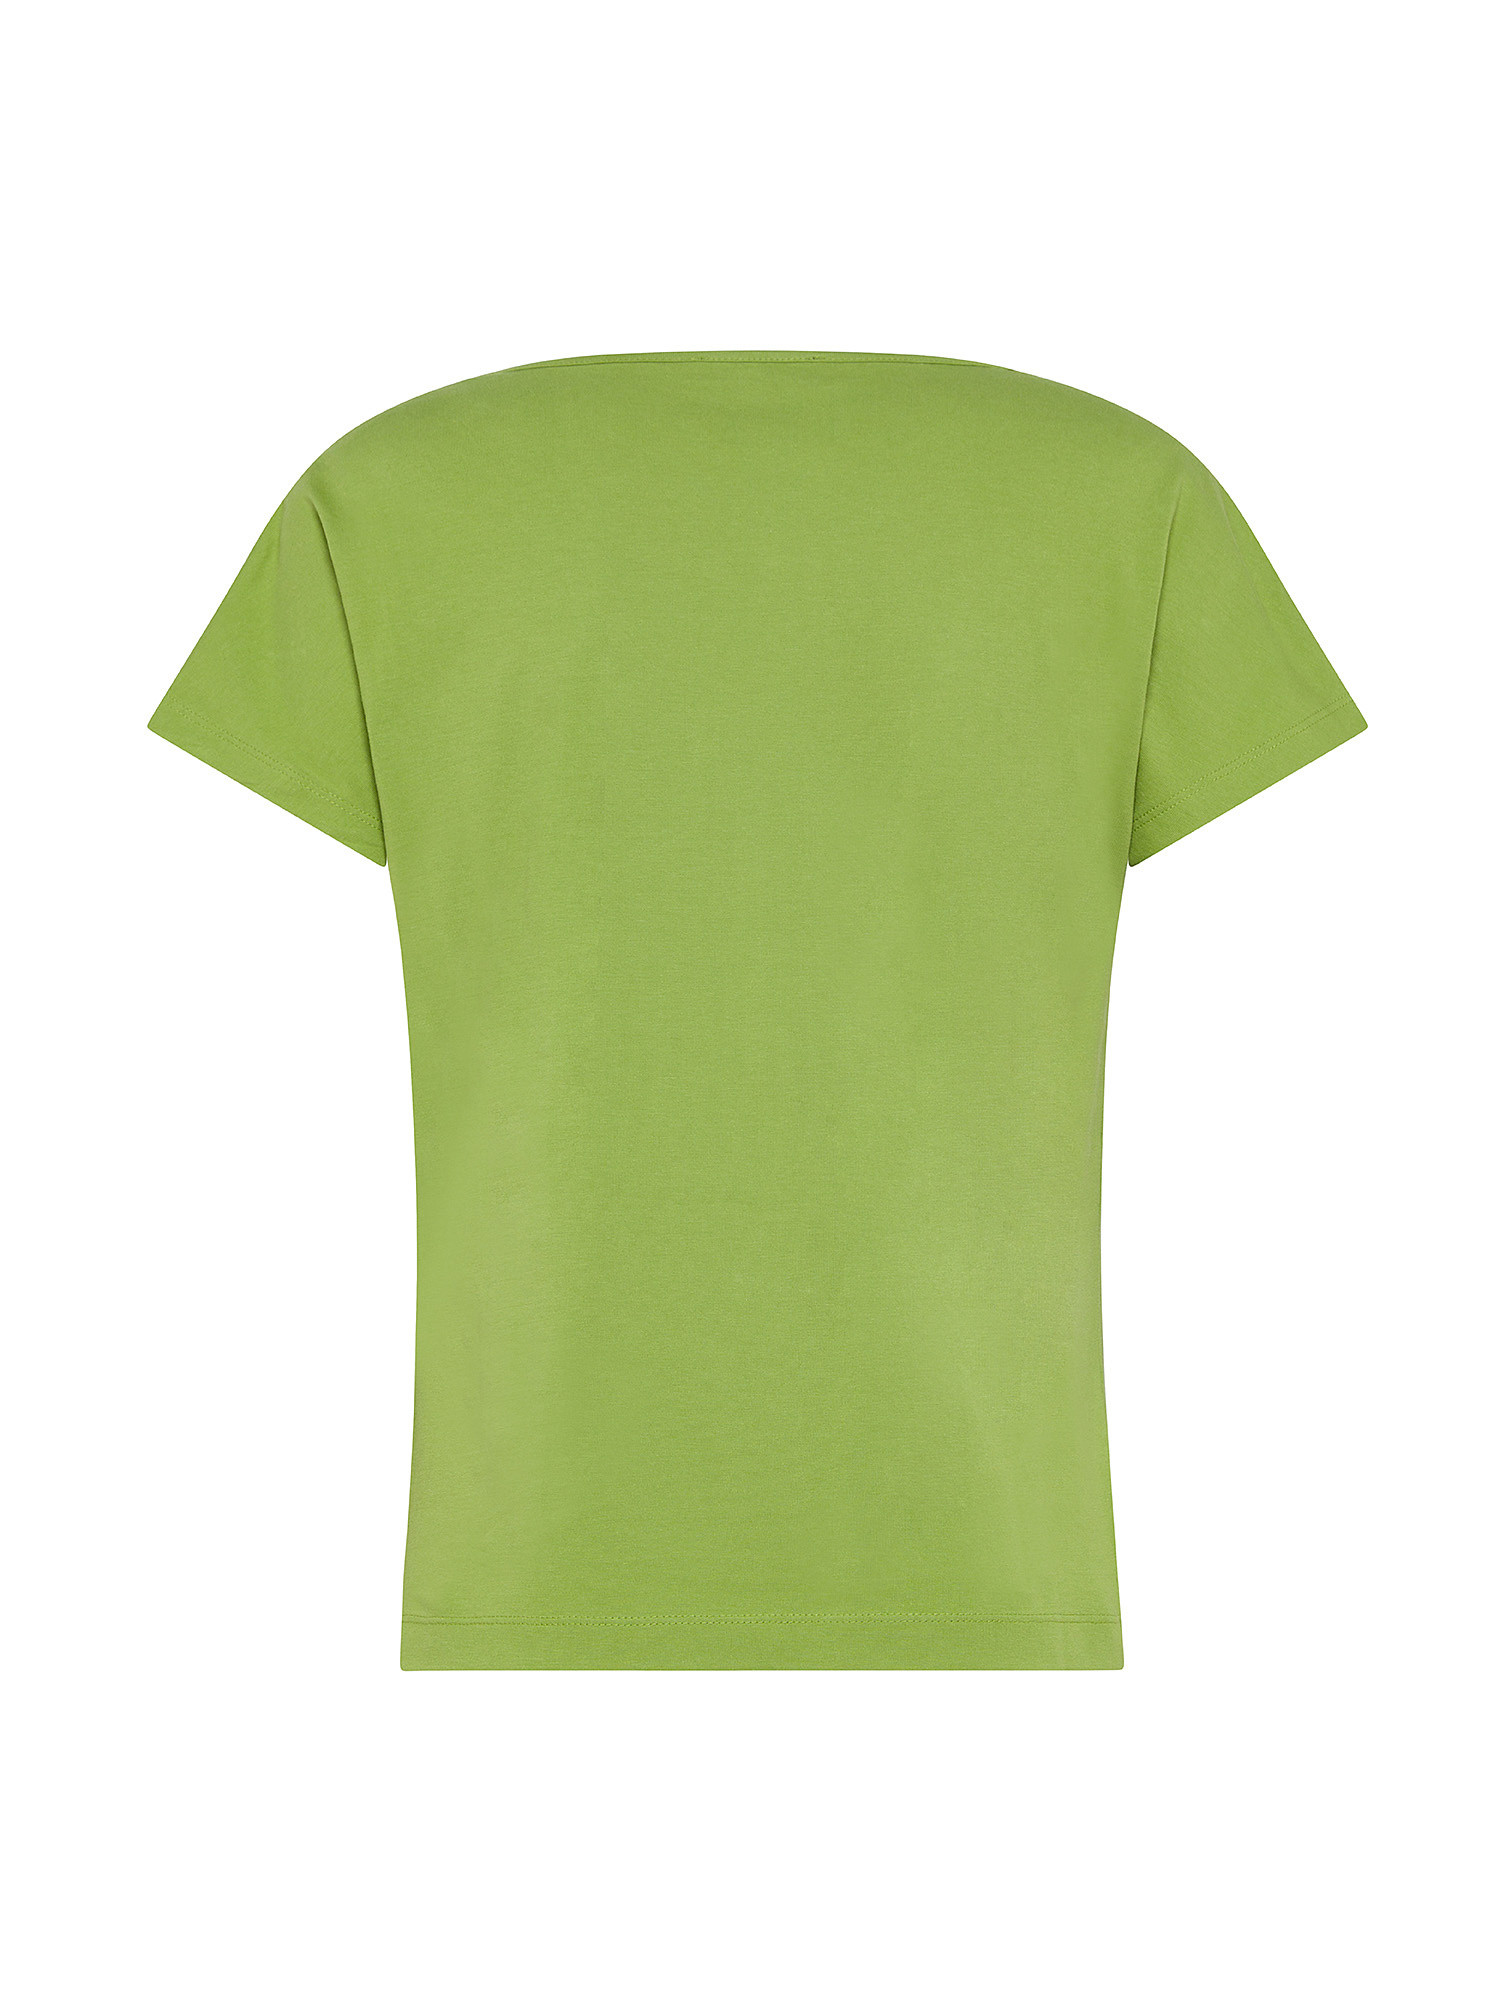 Koan - T-shirt with embroidery, Green, large image number 1